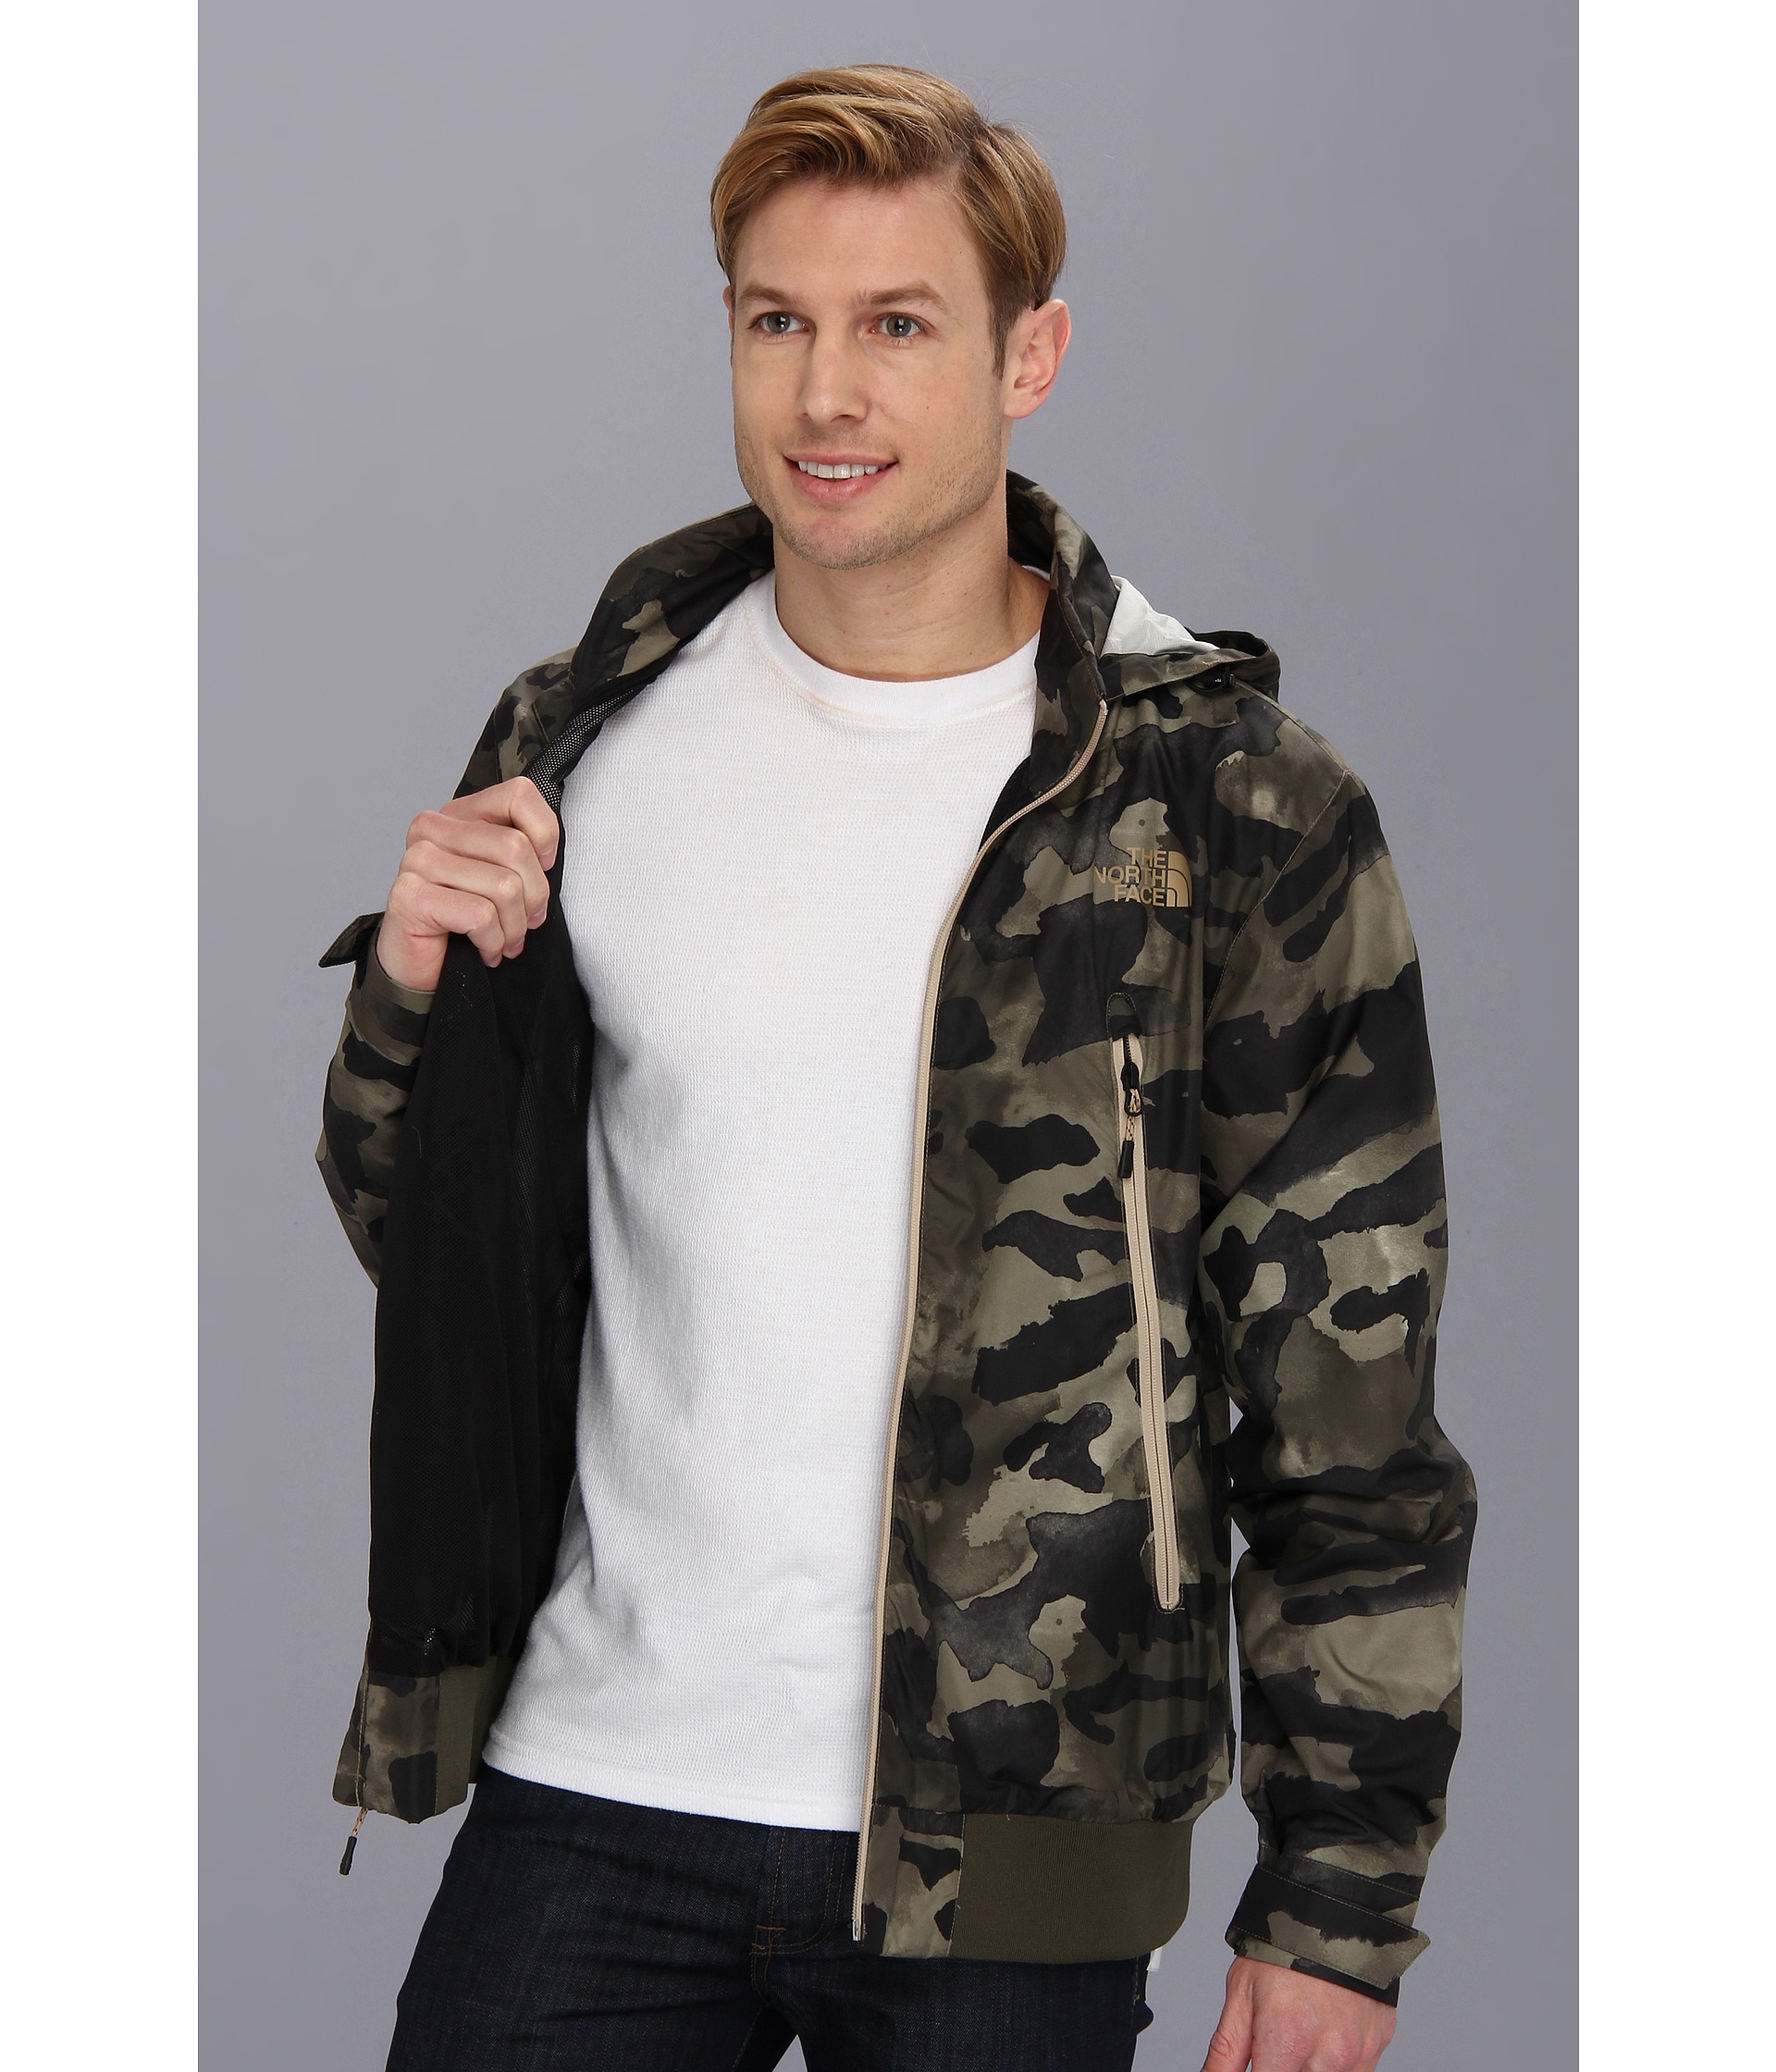 The North Face Diablo Wind Jacket Burnt Olive Green Camo | Shipped Free ...